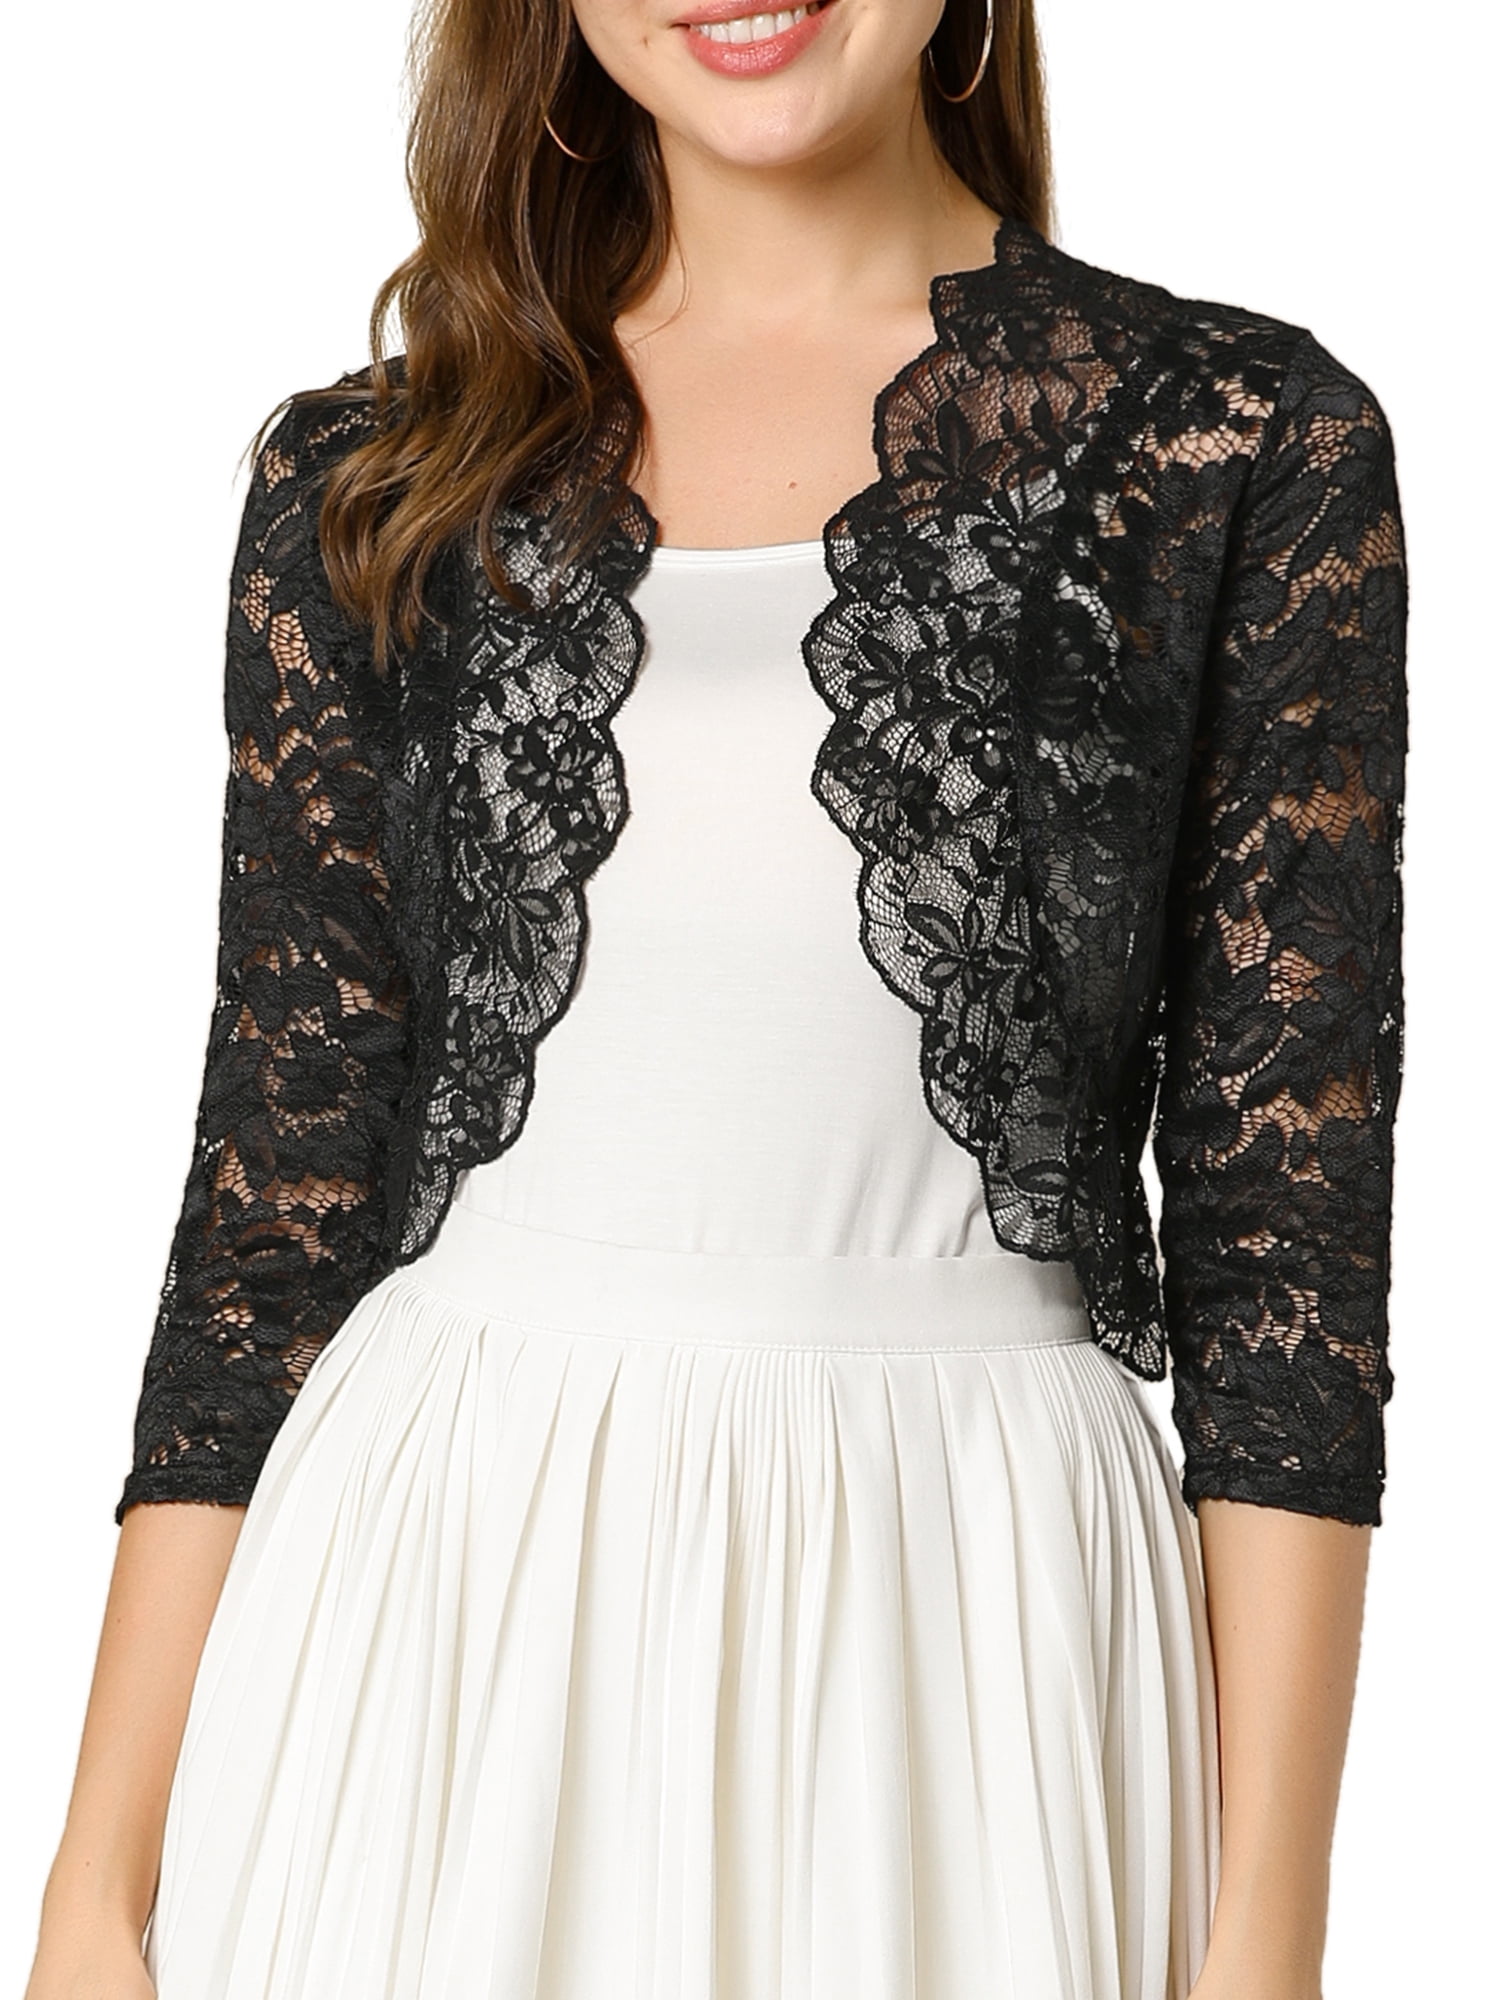 Meaneor Women Vintage Style Open Front 3/4 Sleeve Shrug Floral Lace Bolero Cardigan S-XXL 